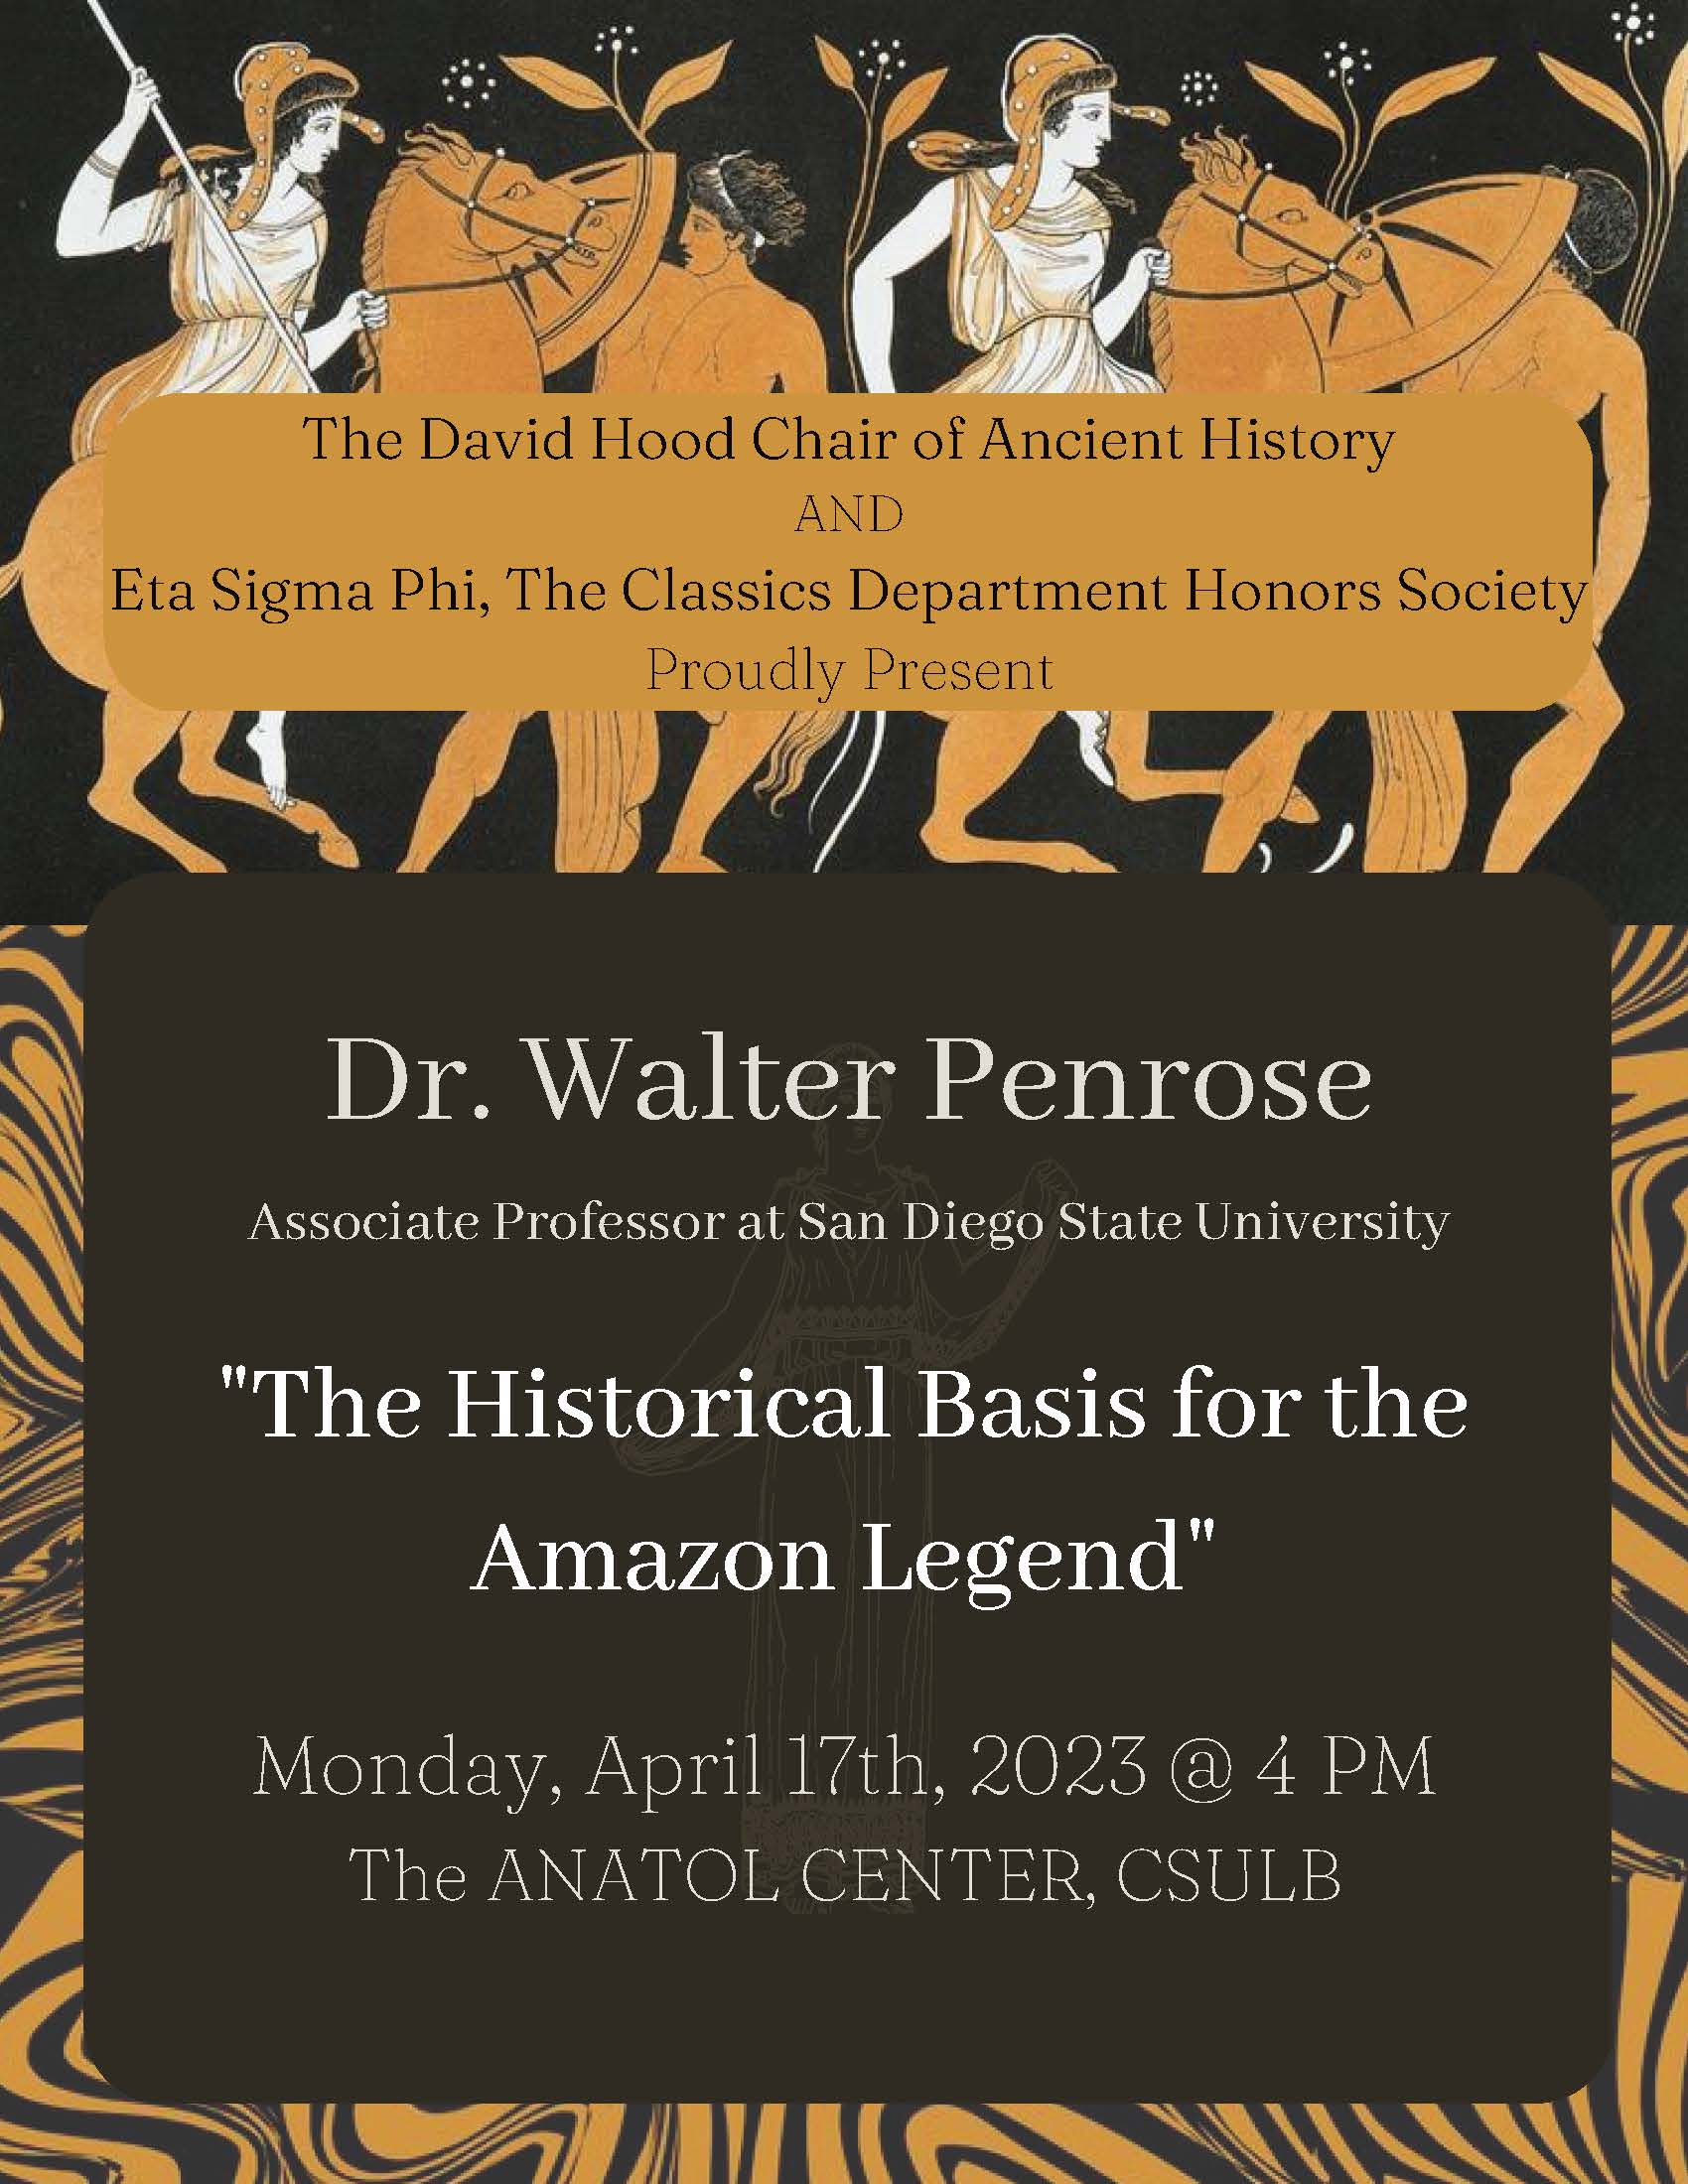 Poster for a lecture hosted by The David Hood Chair of Ancient History and Eta Sigma Phi, the Classics Department Honors Society. Dr. Walter Penrose, Associate Professor at San Diego State University, will speak about "The Historical Basis for the Amazon Legend" on Monday, April 17, 2023 at 4:00pm in the Anatol Center on the CSULB campus. The poster is black with white text and a kind of stylized border. At top is an image of Amazons (female warriors) on horses and fighting men standing on the ground with shields. 